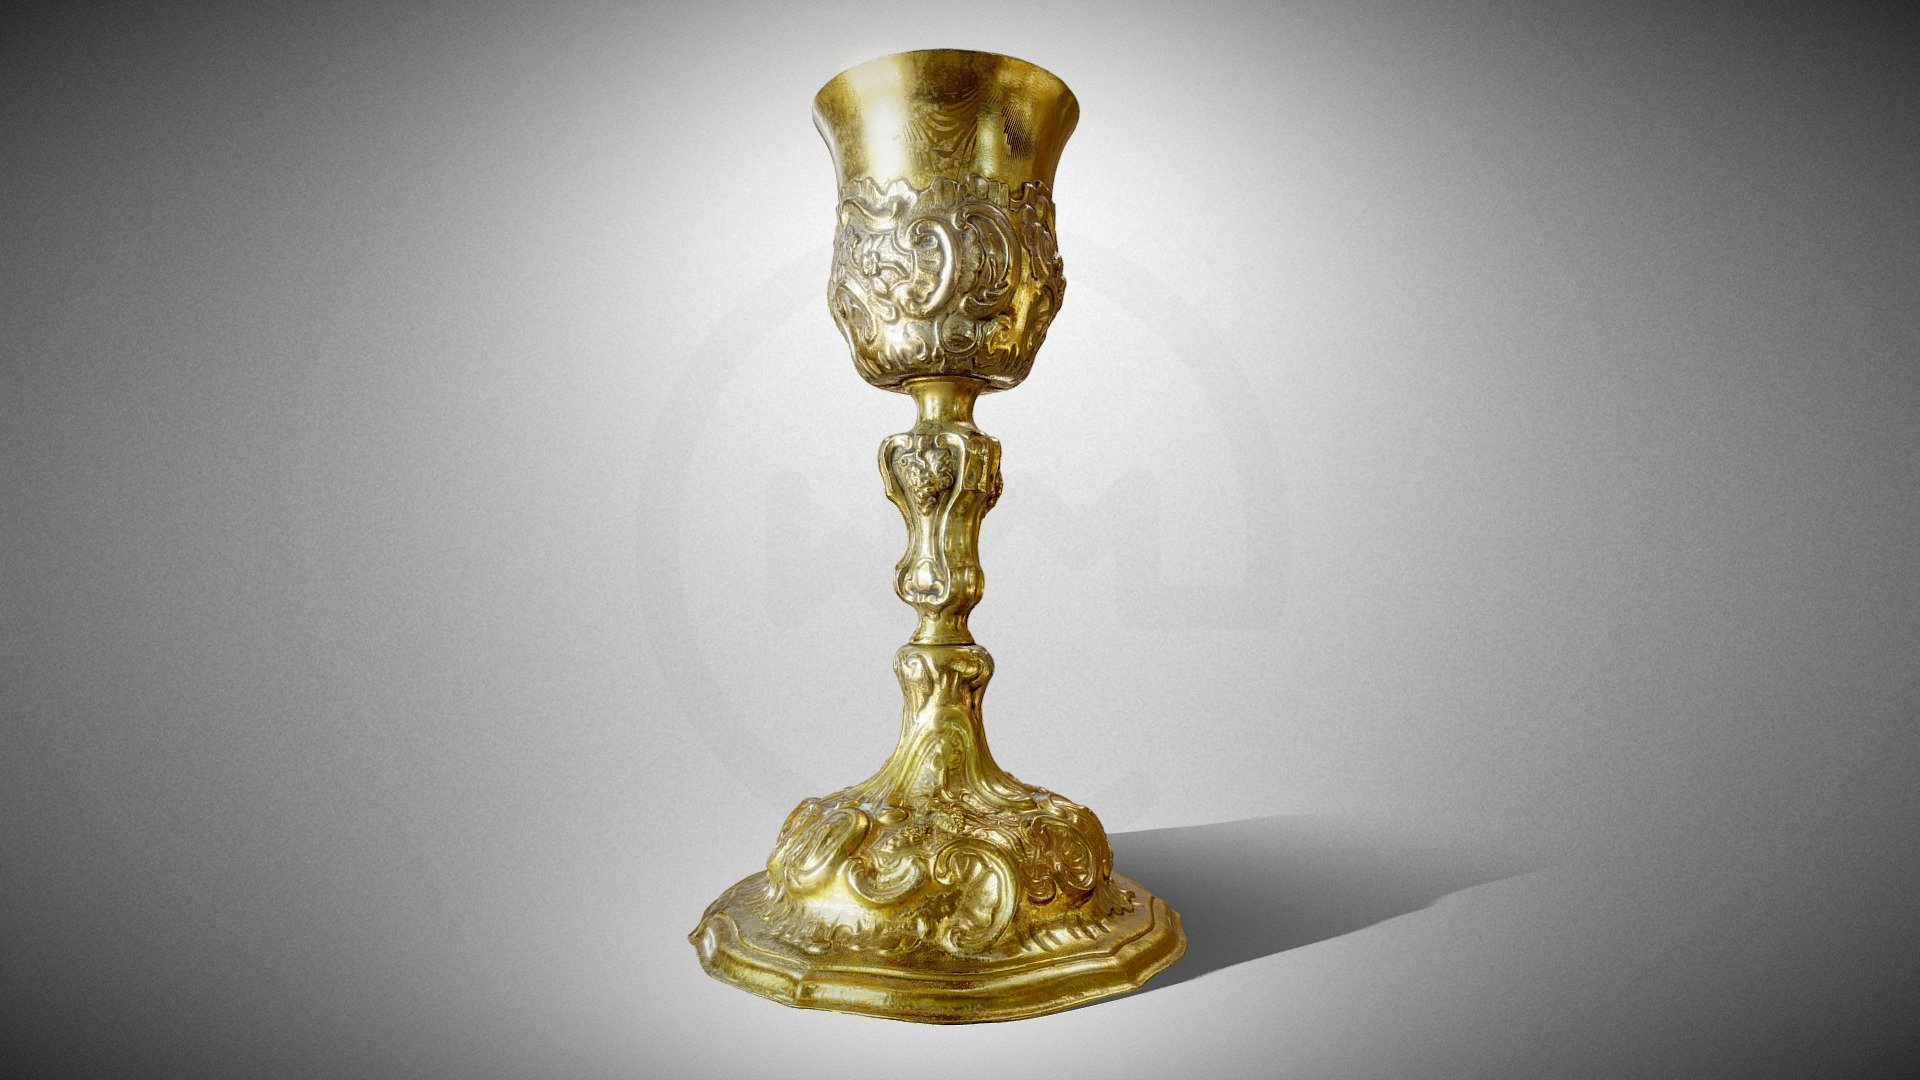 Mass chalice

1773, Kraków, Poland, Museum of Miechowska Land in Miechów

For more images and further information, visit:

https://muzea.malopolska.pl/en/objects-list/3095

Inventory number: MZM/D/S/6

Localisation of the physical object: Museum of Miechowska Land in Miechów

Digitalisation: Regional Digitalisation Lab, Małopolska Institute of Culture in Kraków, Poland; “Virtual Museums of Małopolska” Project - Mass chalice - Download Free 3D model by Virtual Museums of Małopolska (@WirtualneMuzeaMalopolski) 3d model